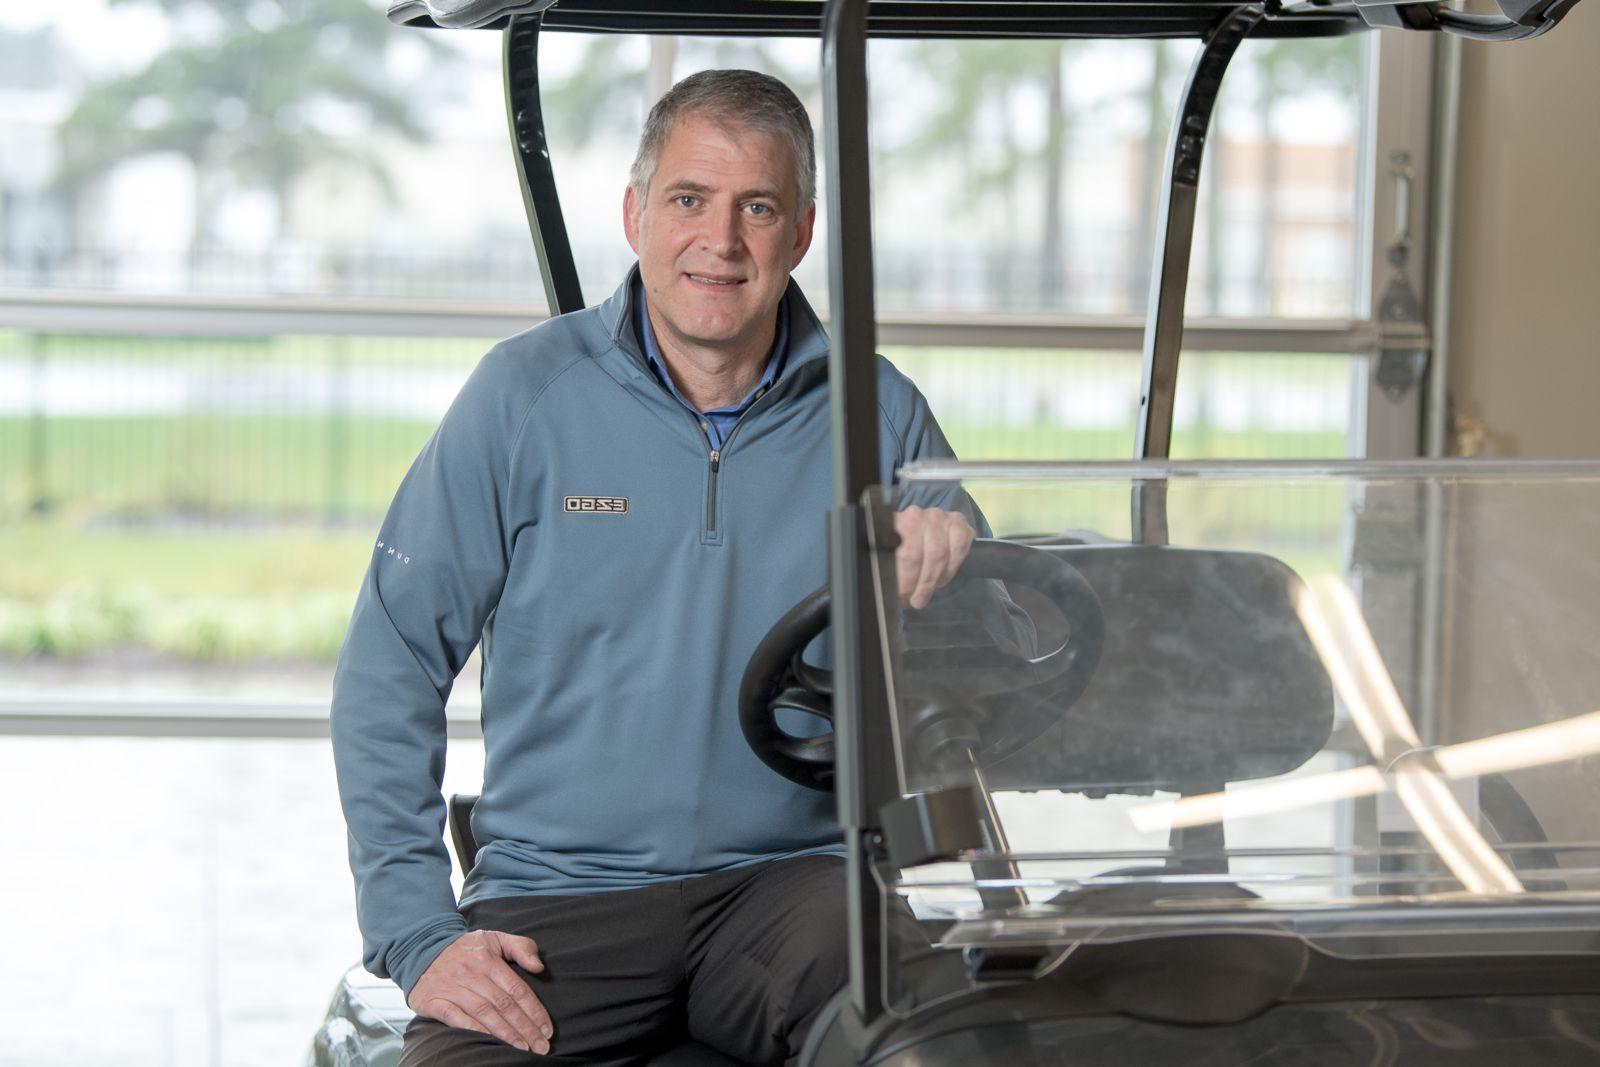 Mr. Gunnar Kleveland, a Caucasian male, sits at the wheel of a golf cart wearing a blue fleece pullover and grey slacks while smiling at the camera.